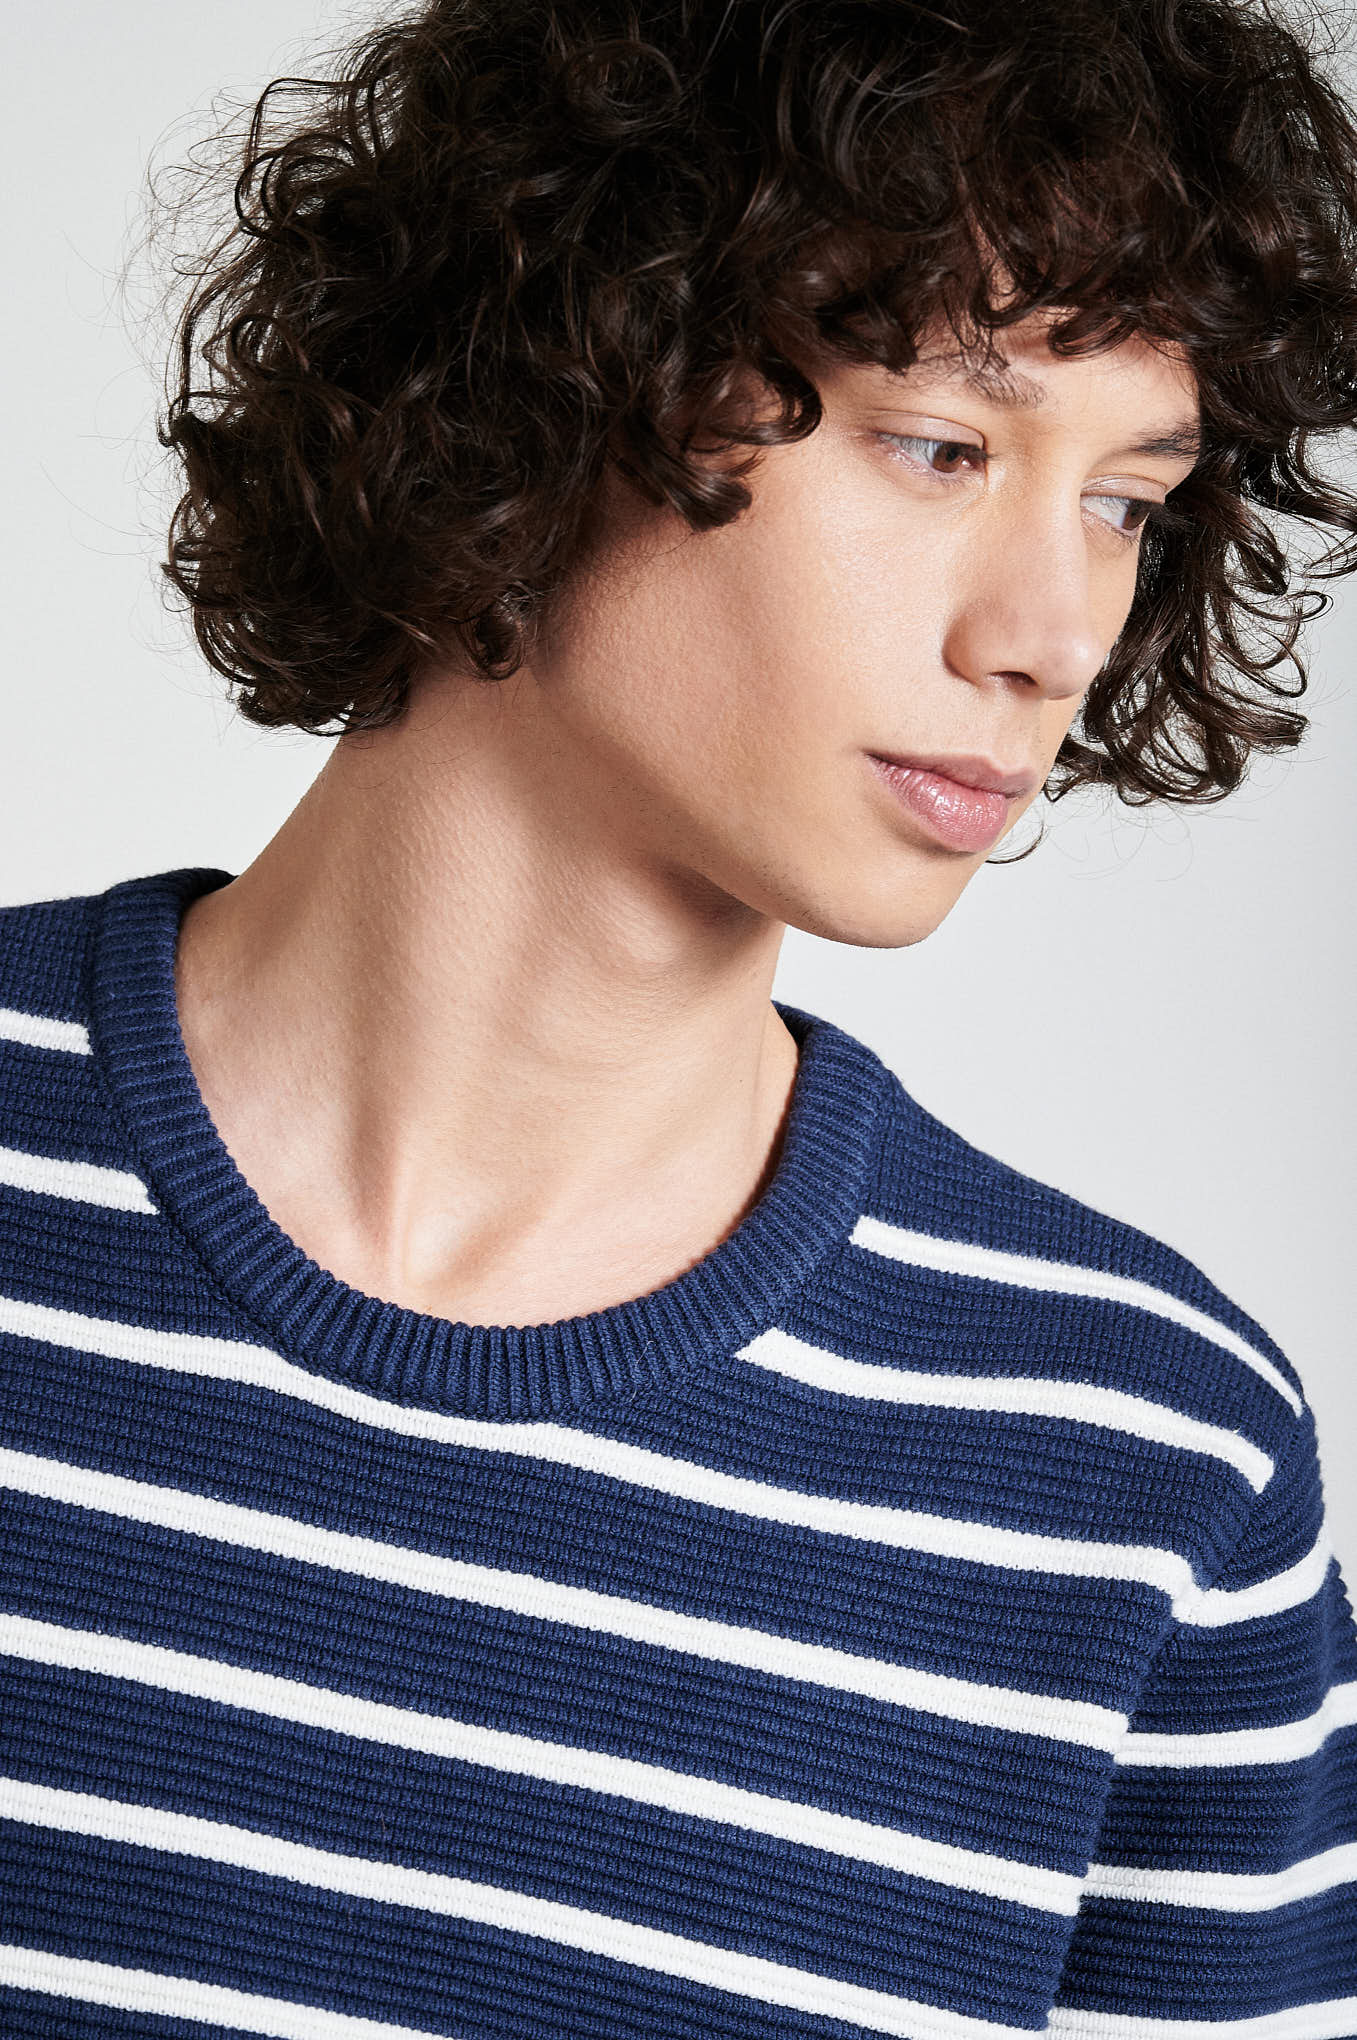 Sweater Stripes Casual Man